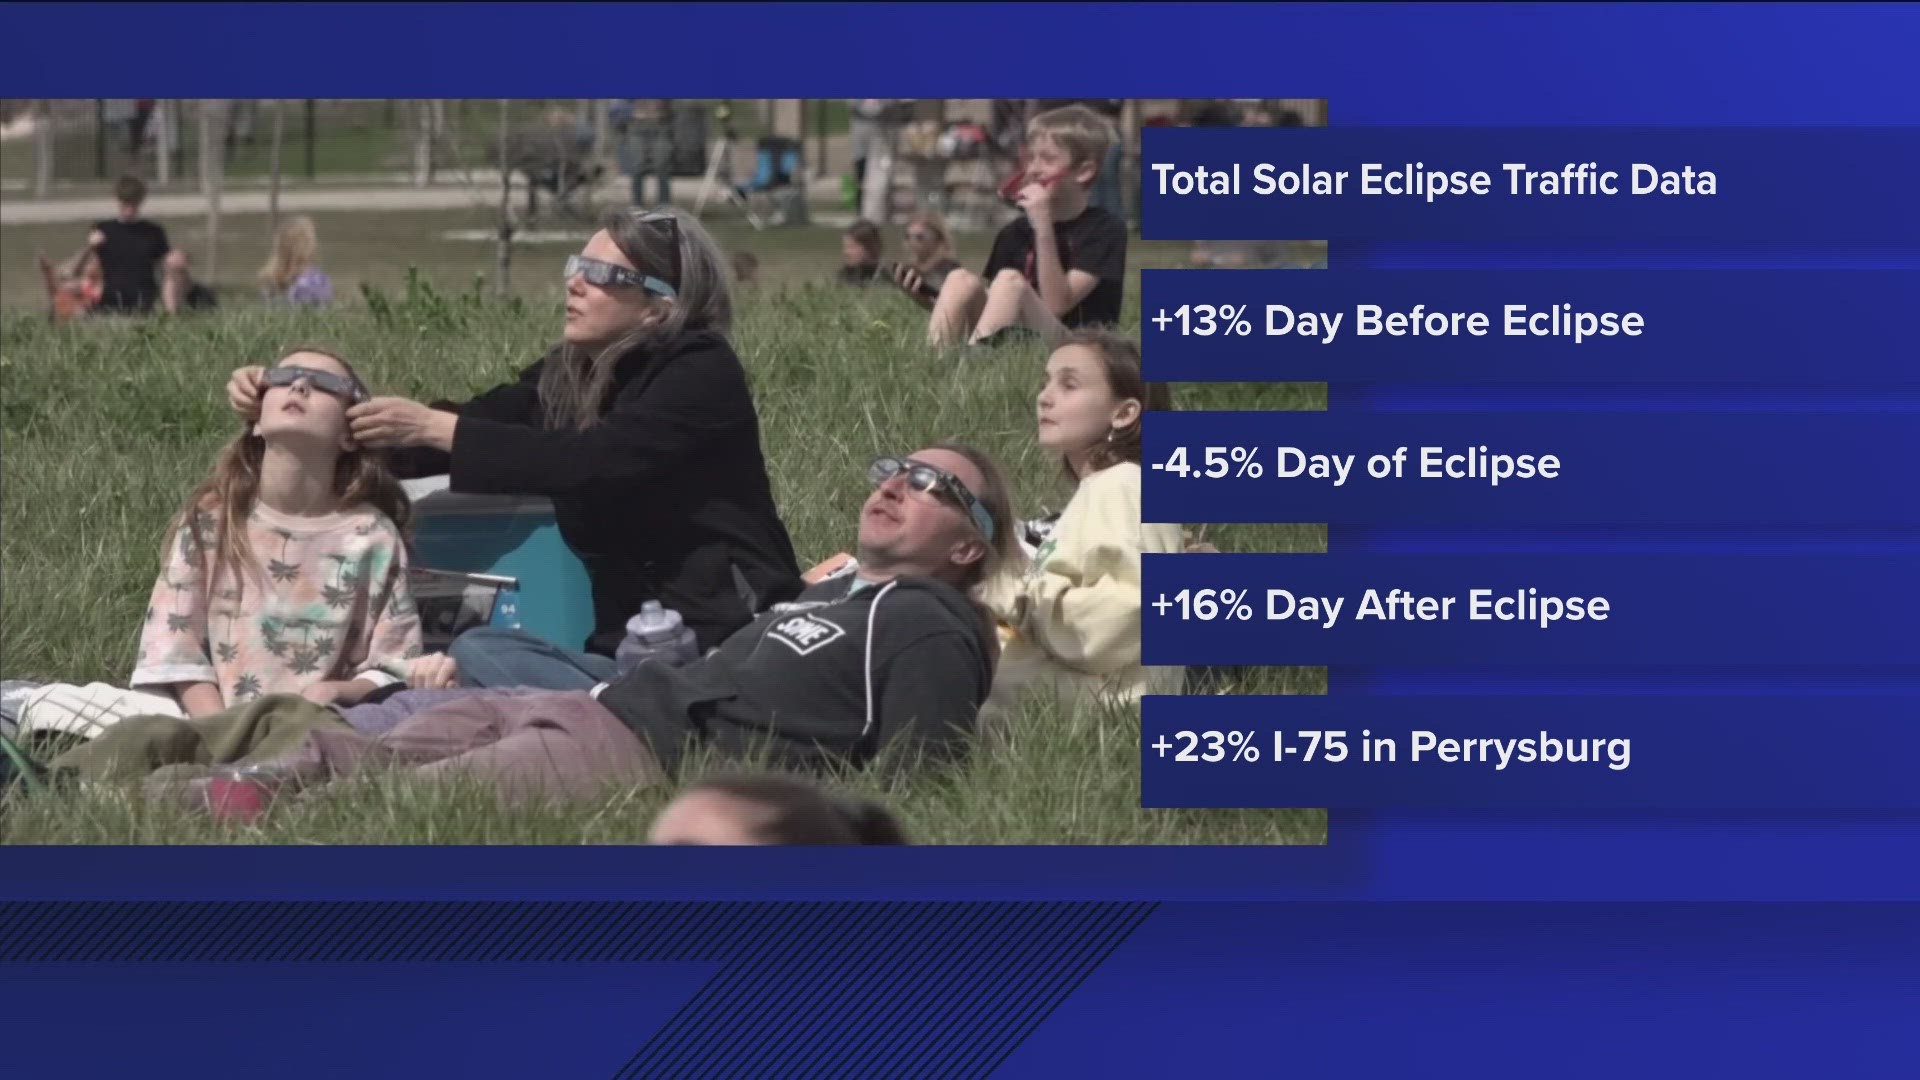 ODOT said travel data shows traffic volumes were up 12.8% on Sunday, fell by 4.4% on the day of the eclipse, and increased again by 15.8% on Tuesday.